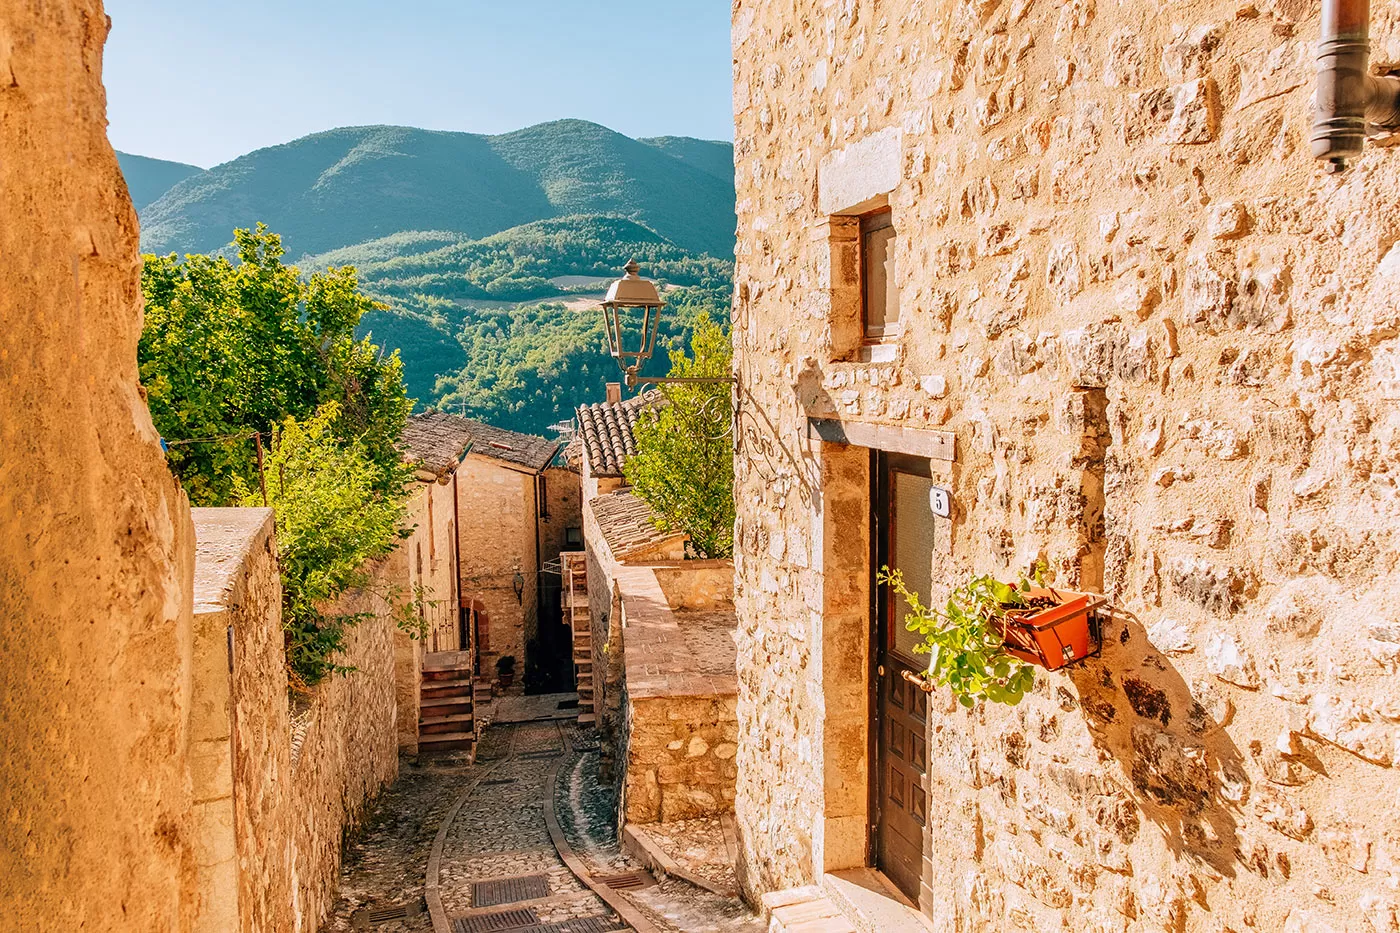 Things to do in Umbria Italy - Vallo di Nera alley - View of village and mountains